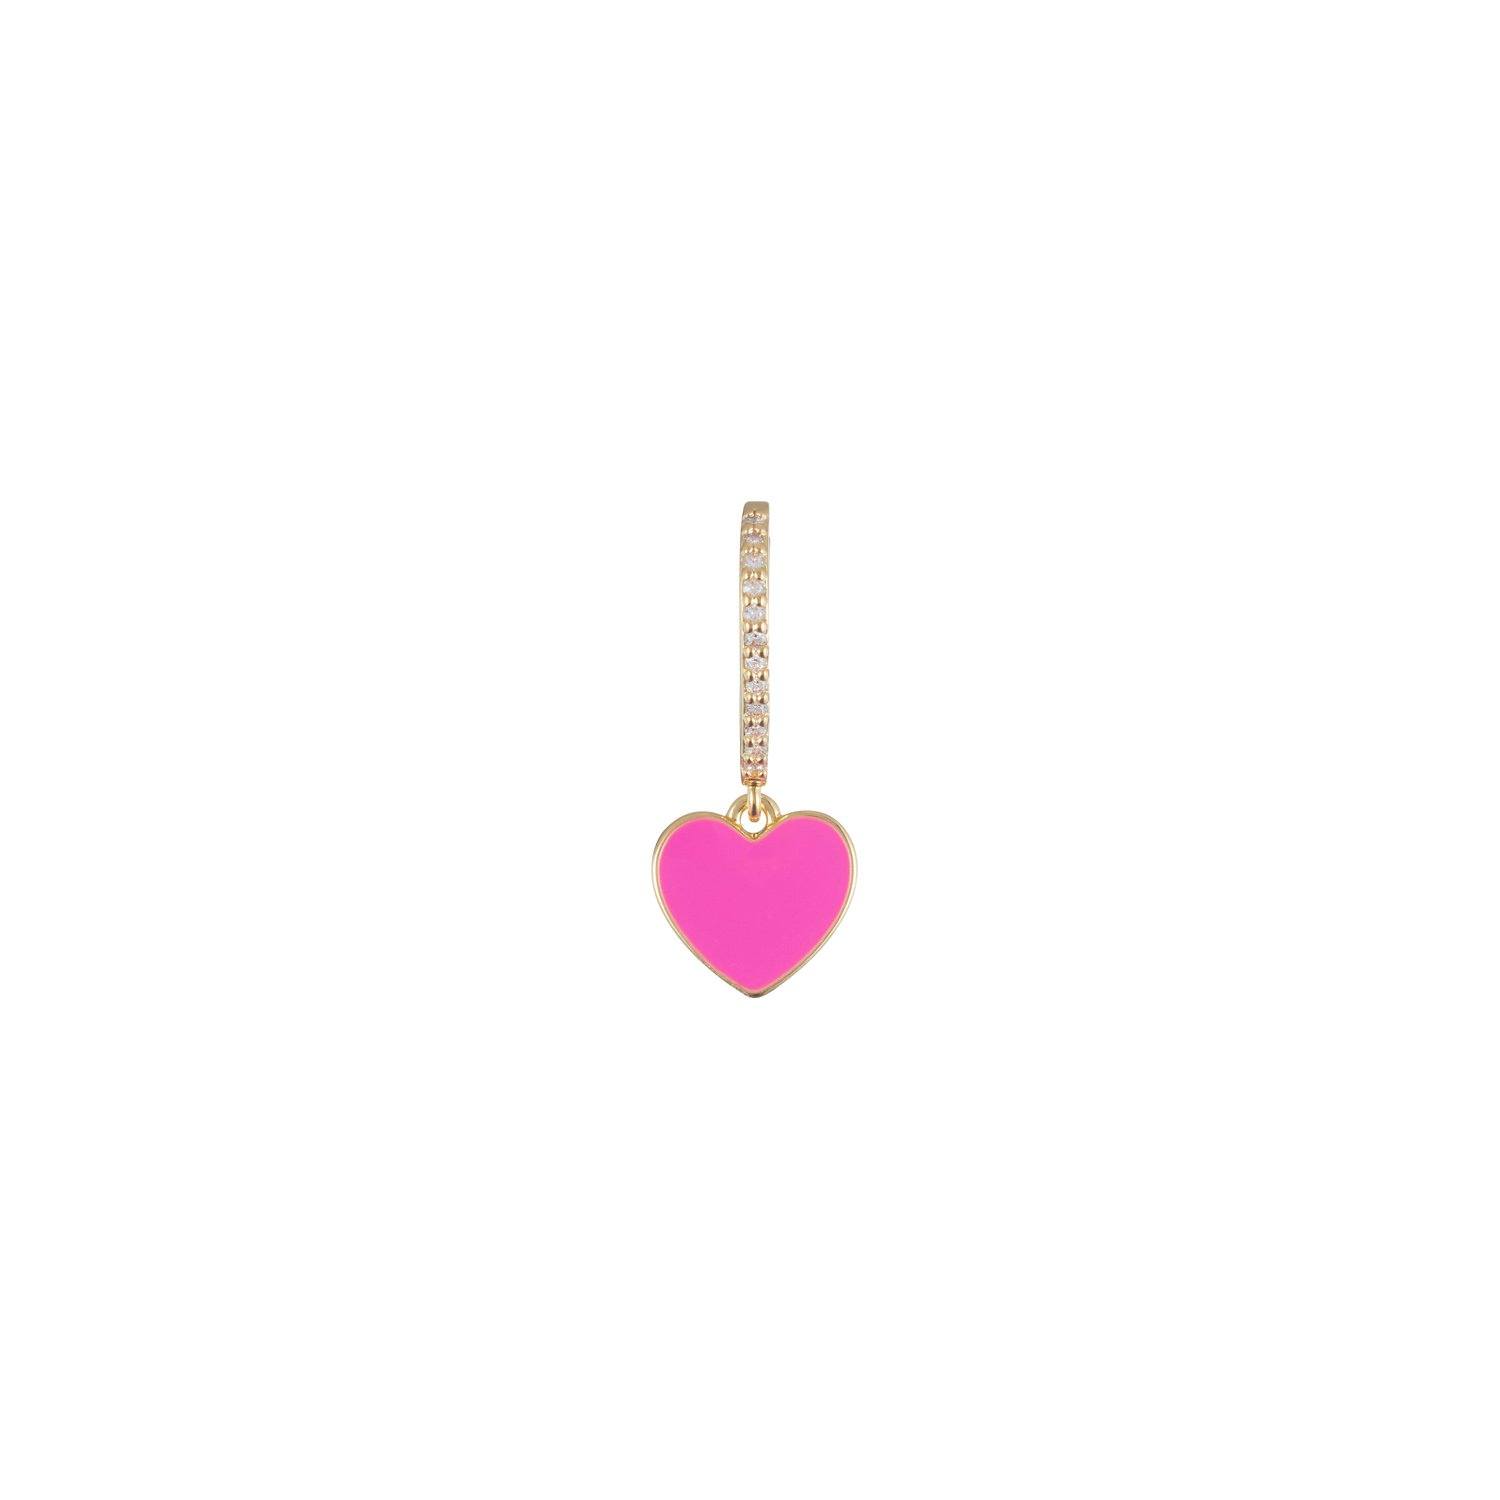 Pink enamel heart shaped pendant with clear stone embellishments 